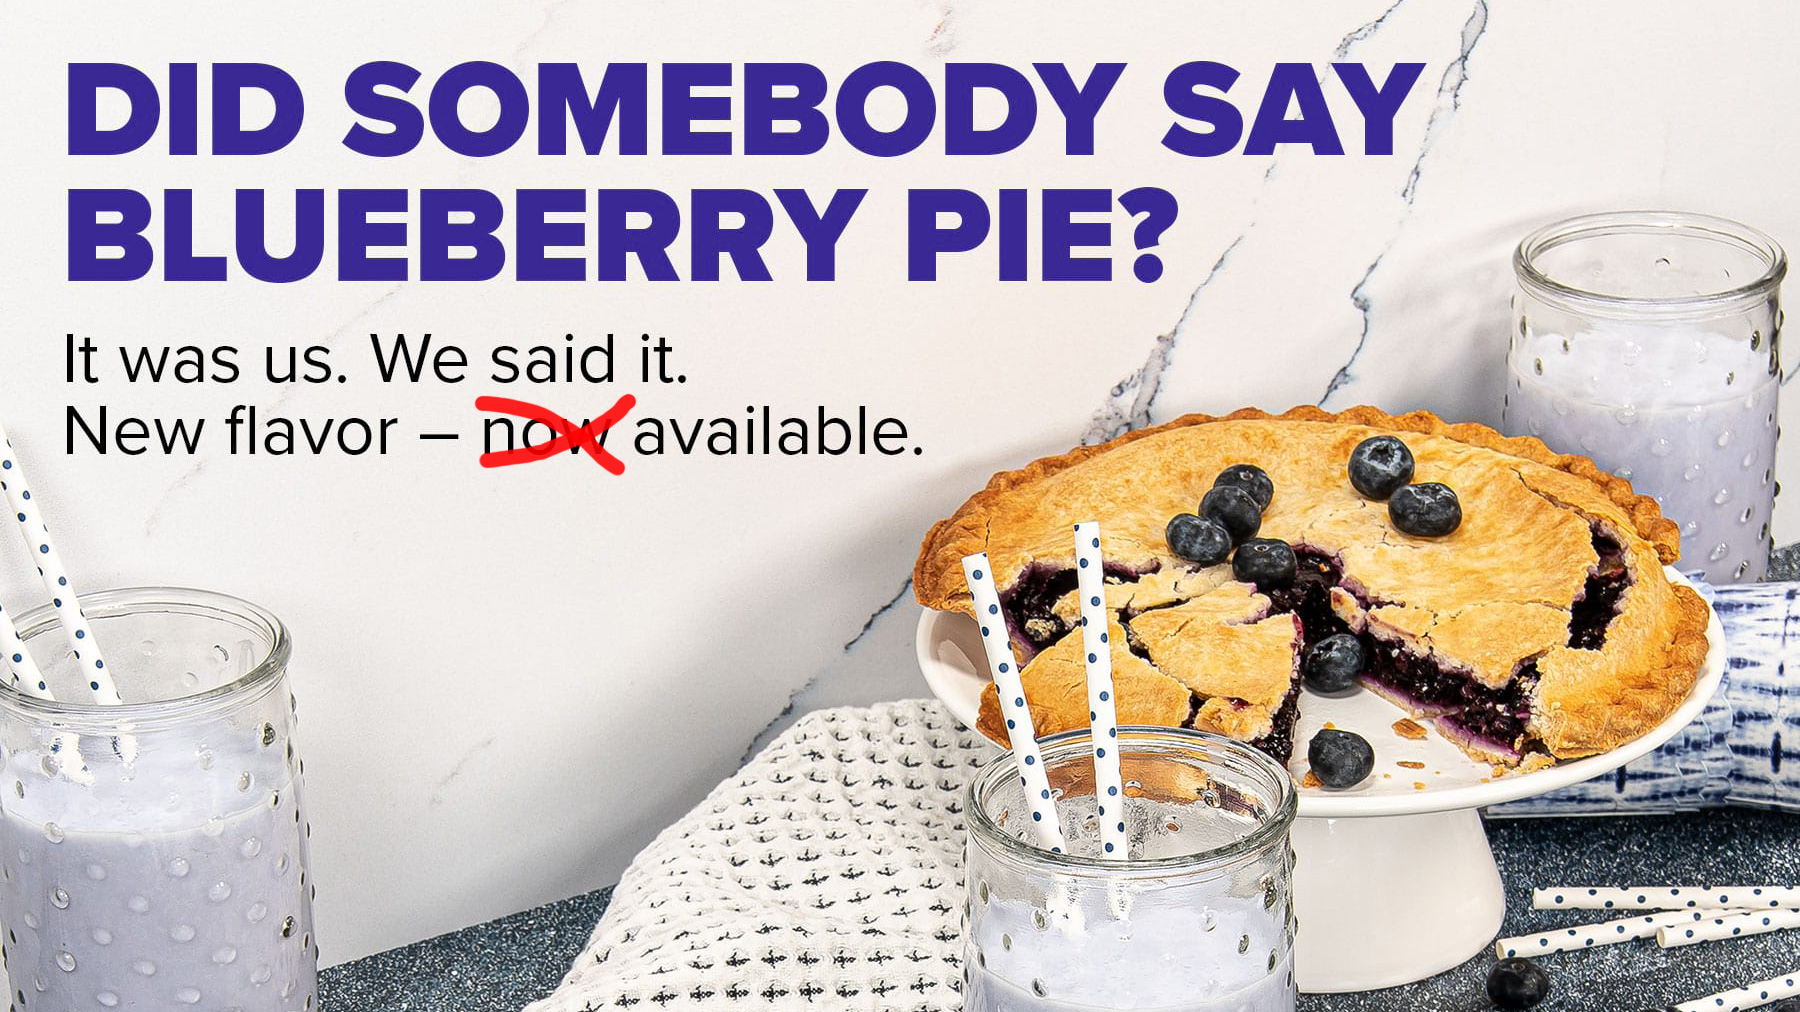 Blueberry Pie is sold out